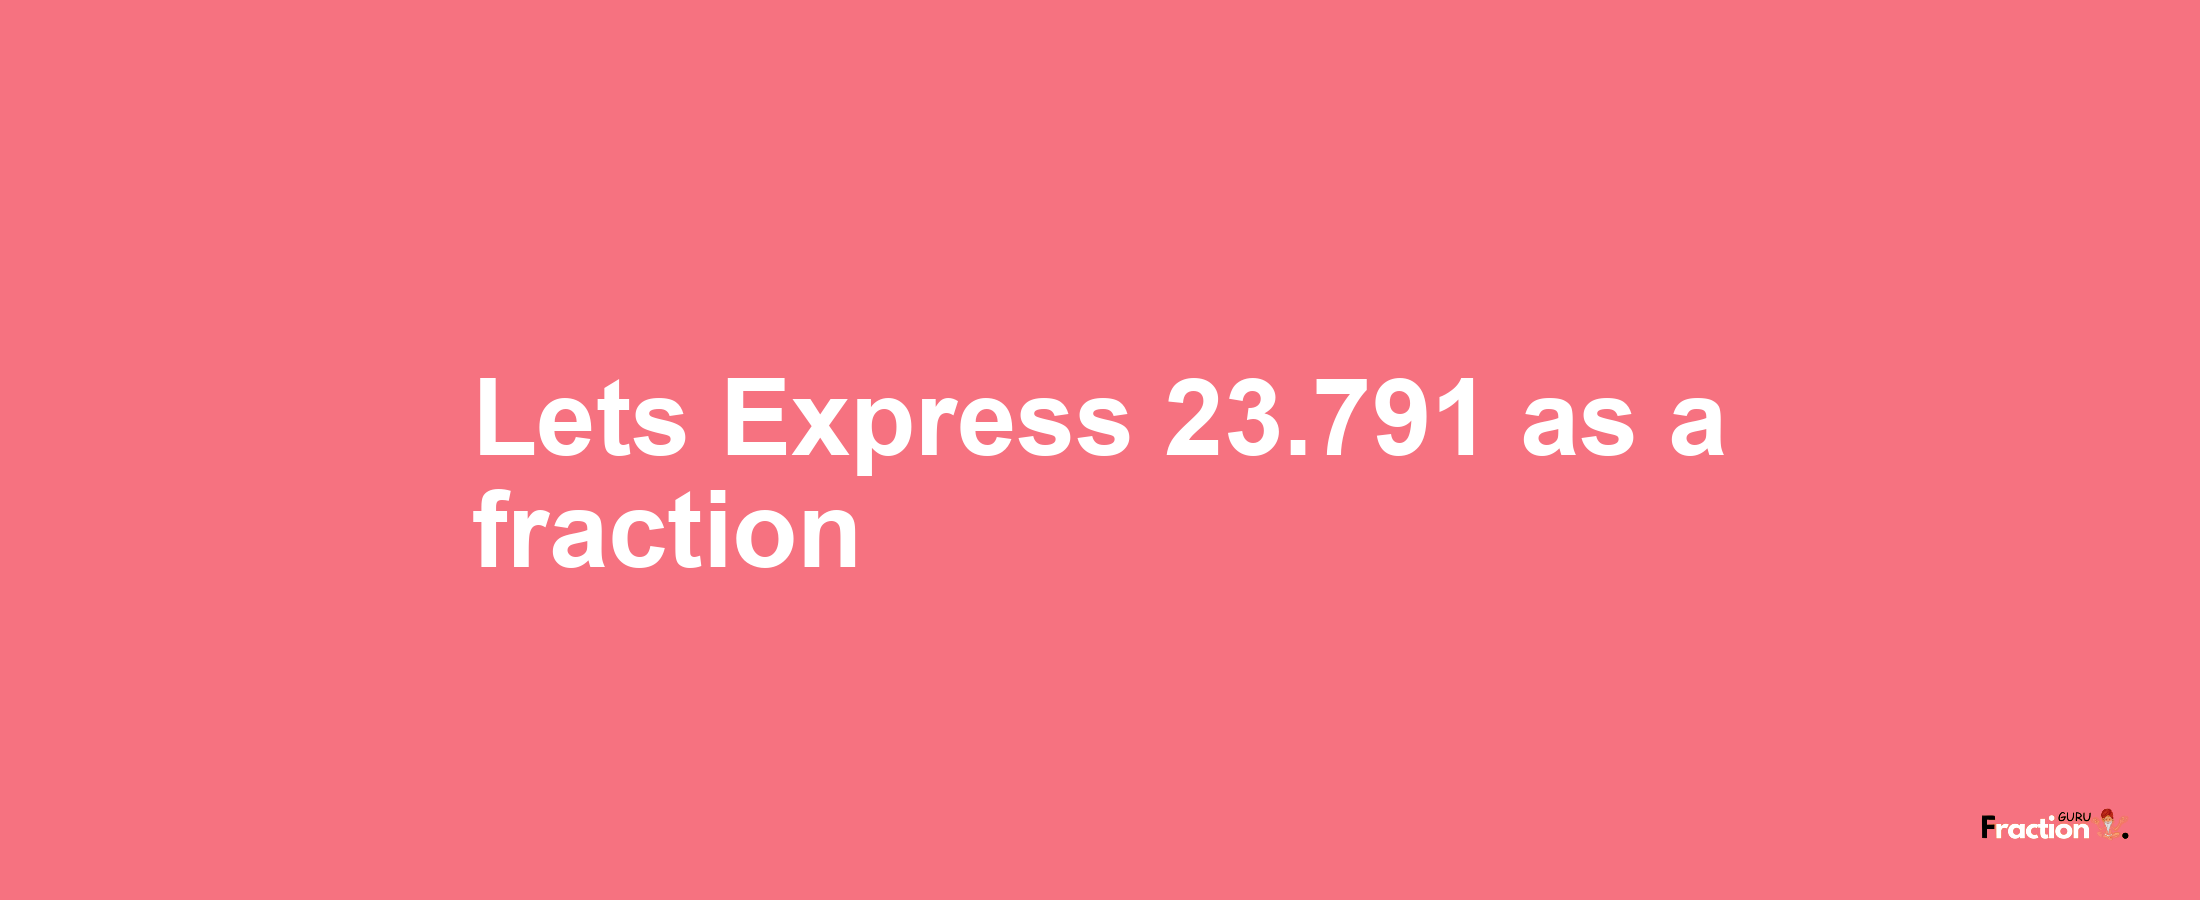 Lets Express 23.791 as afraction